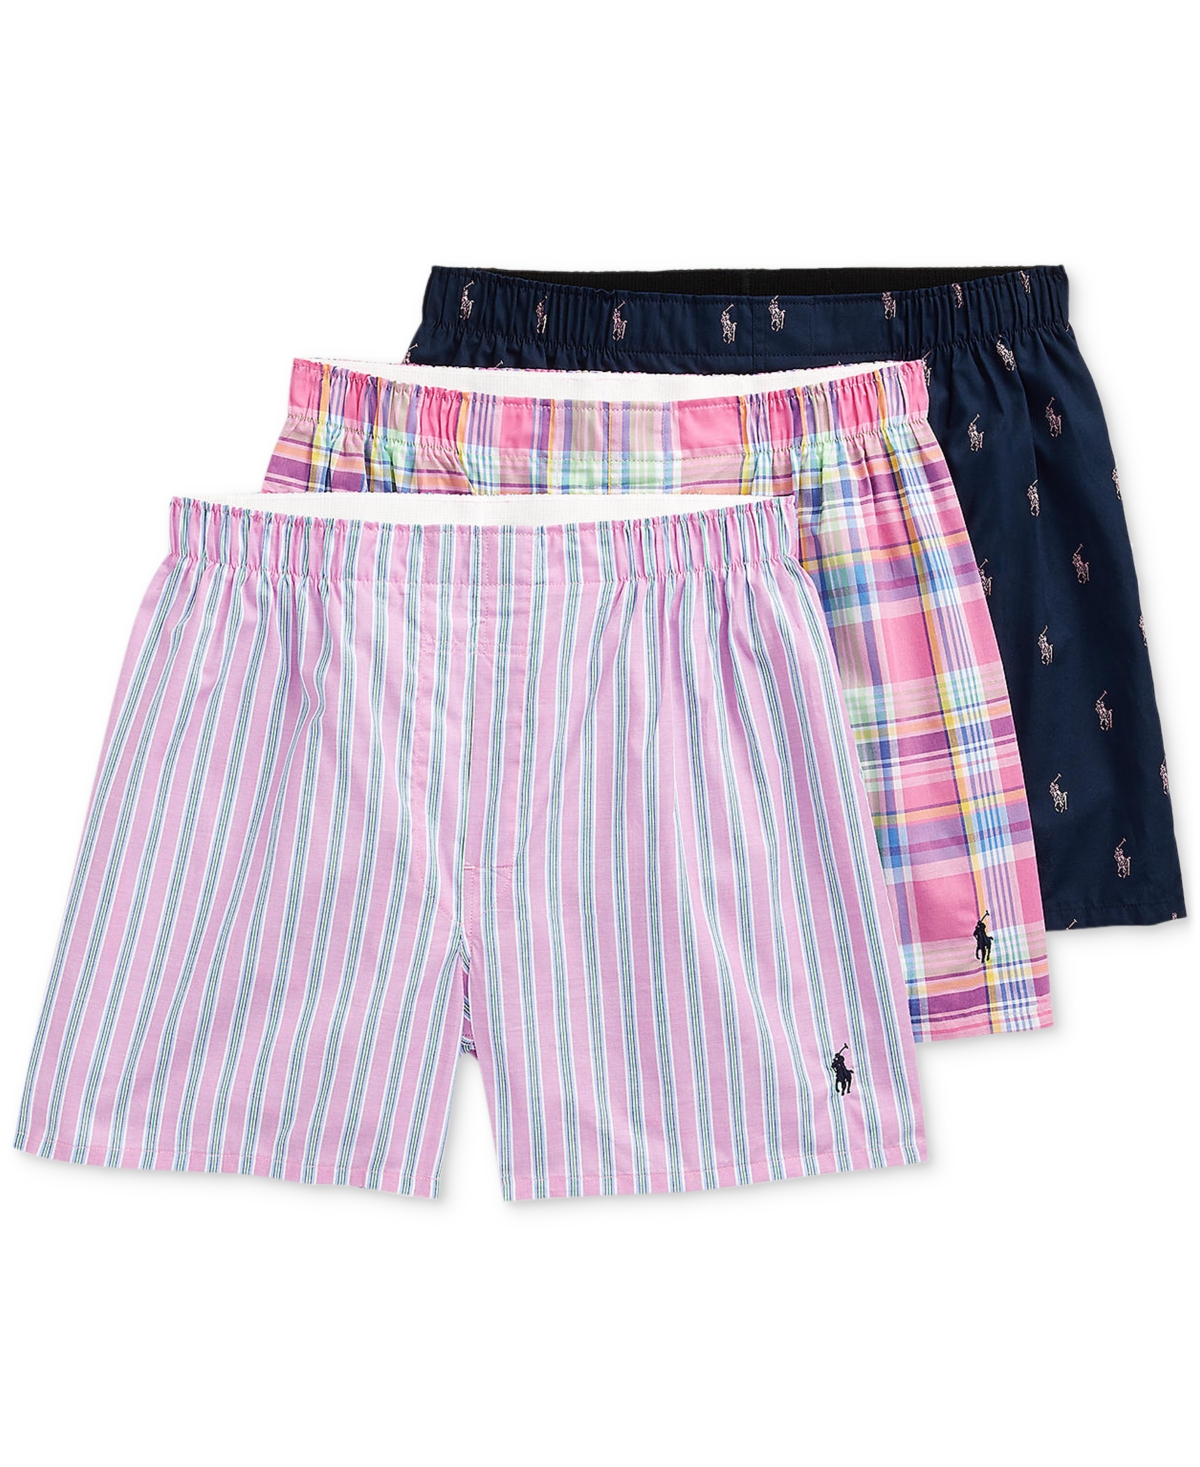 Polo Ralph Lauren Men's 3-pk. Classic-fit Cotton Woven Boxers In Pink Assorted